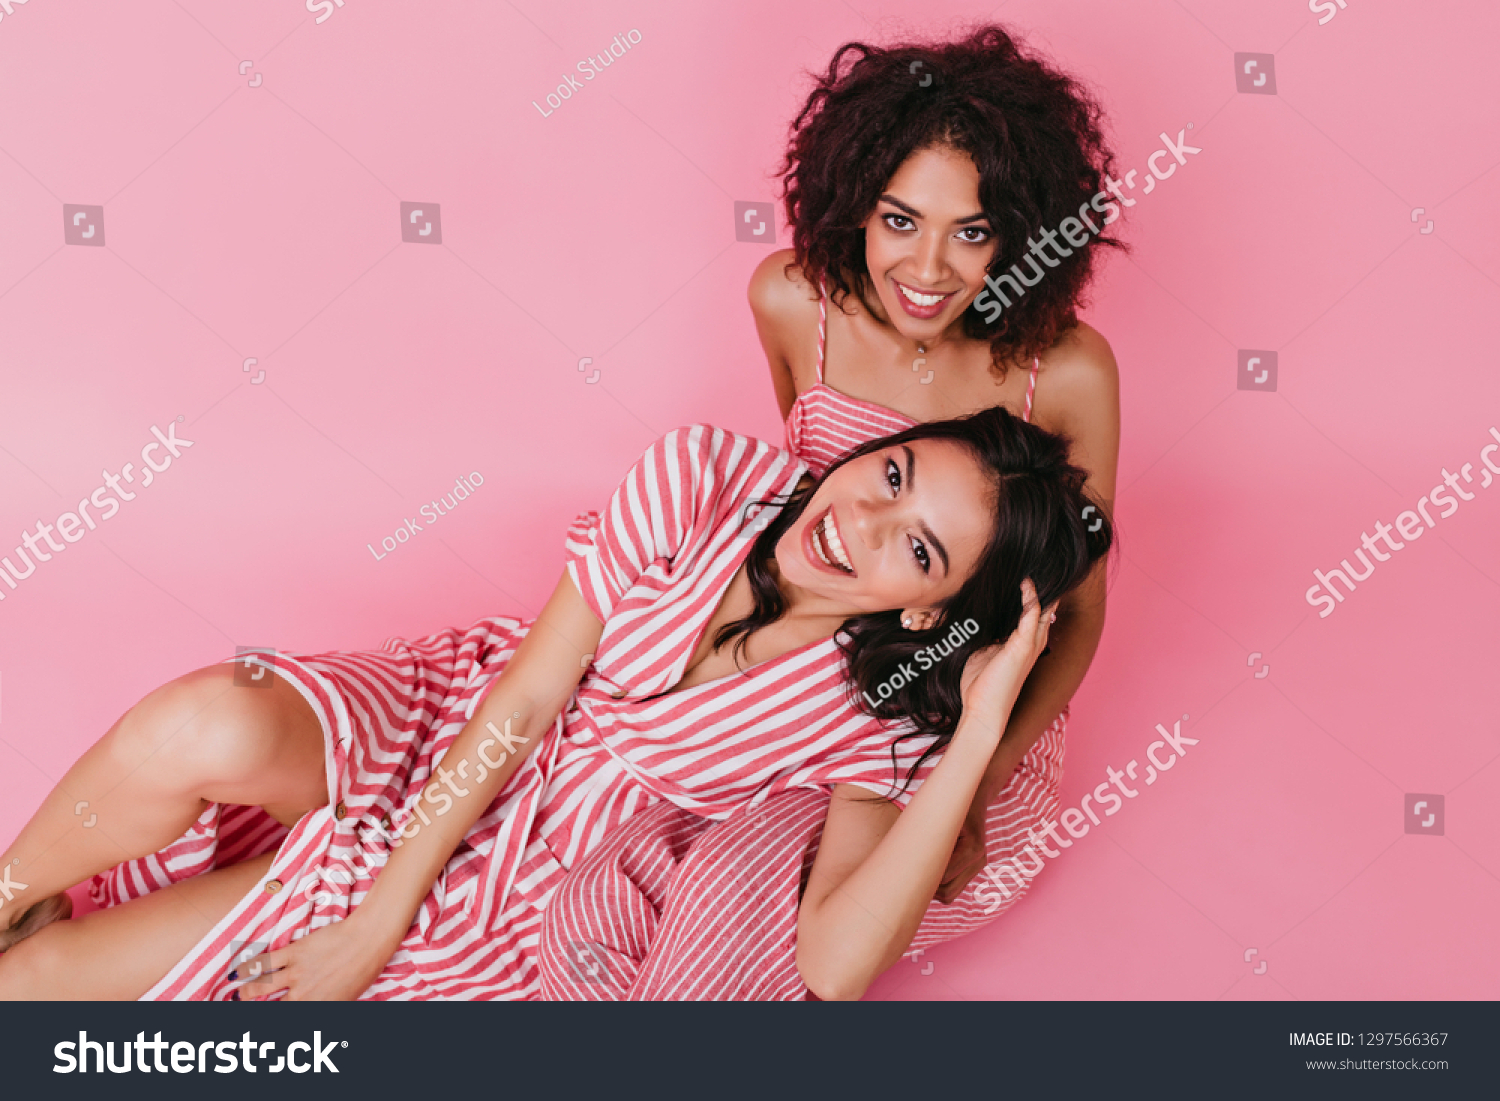 Beautiful girls posing in good mood and having fun on isolated pink background #1297566367